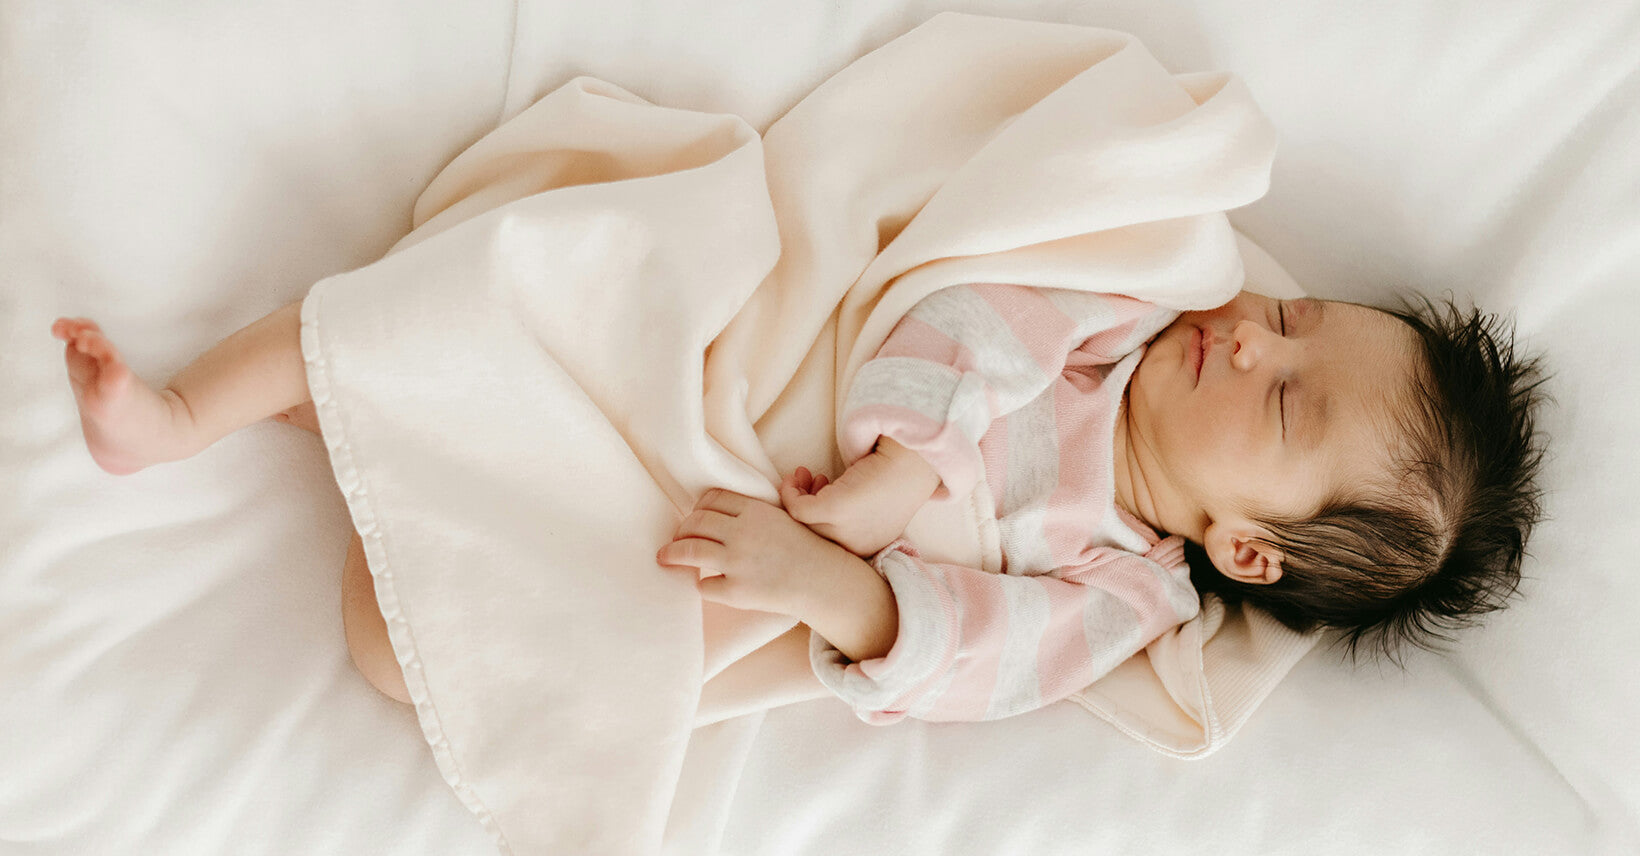 What should baby wear to sleep?